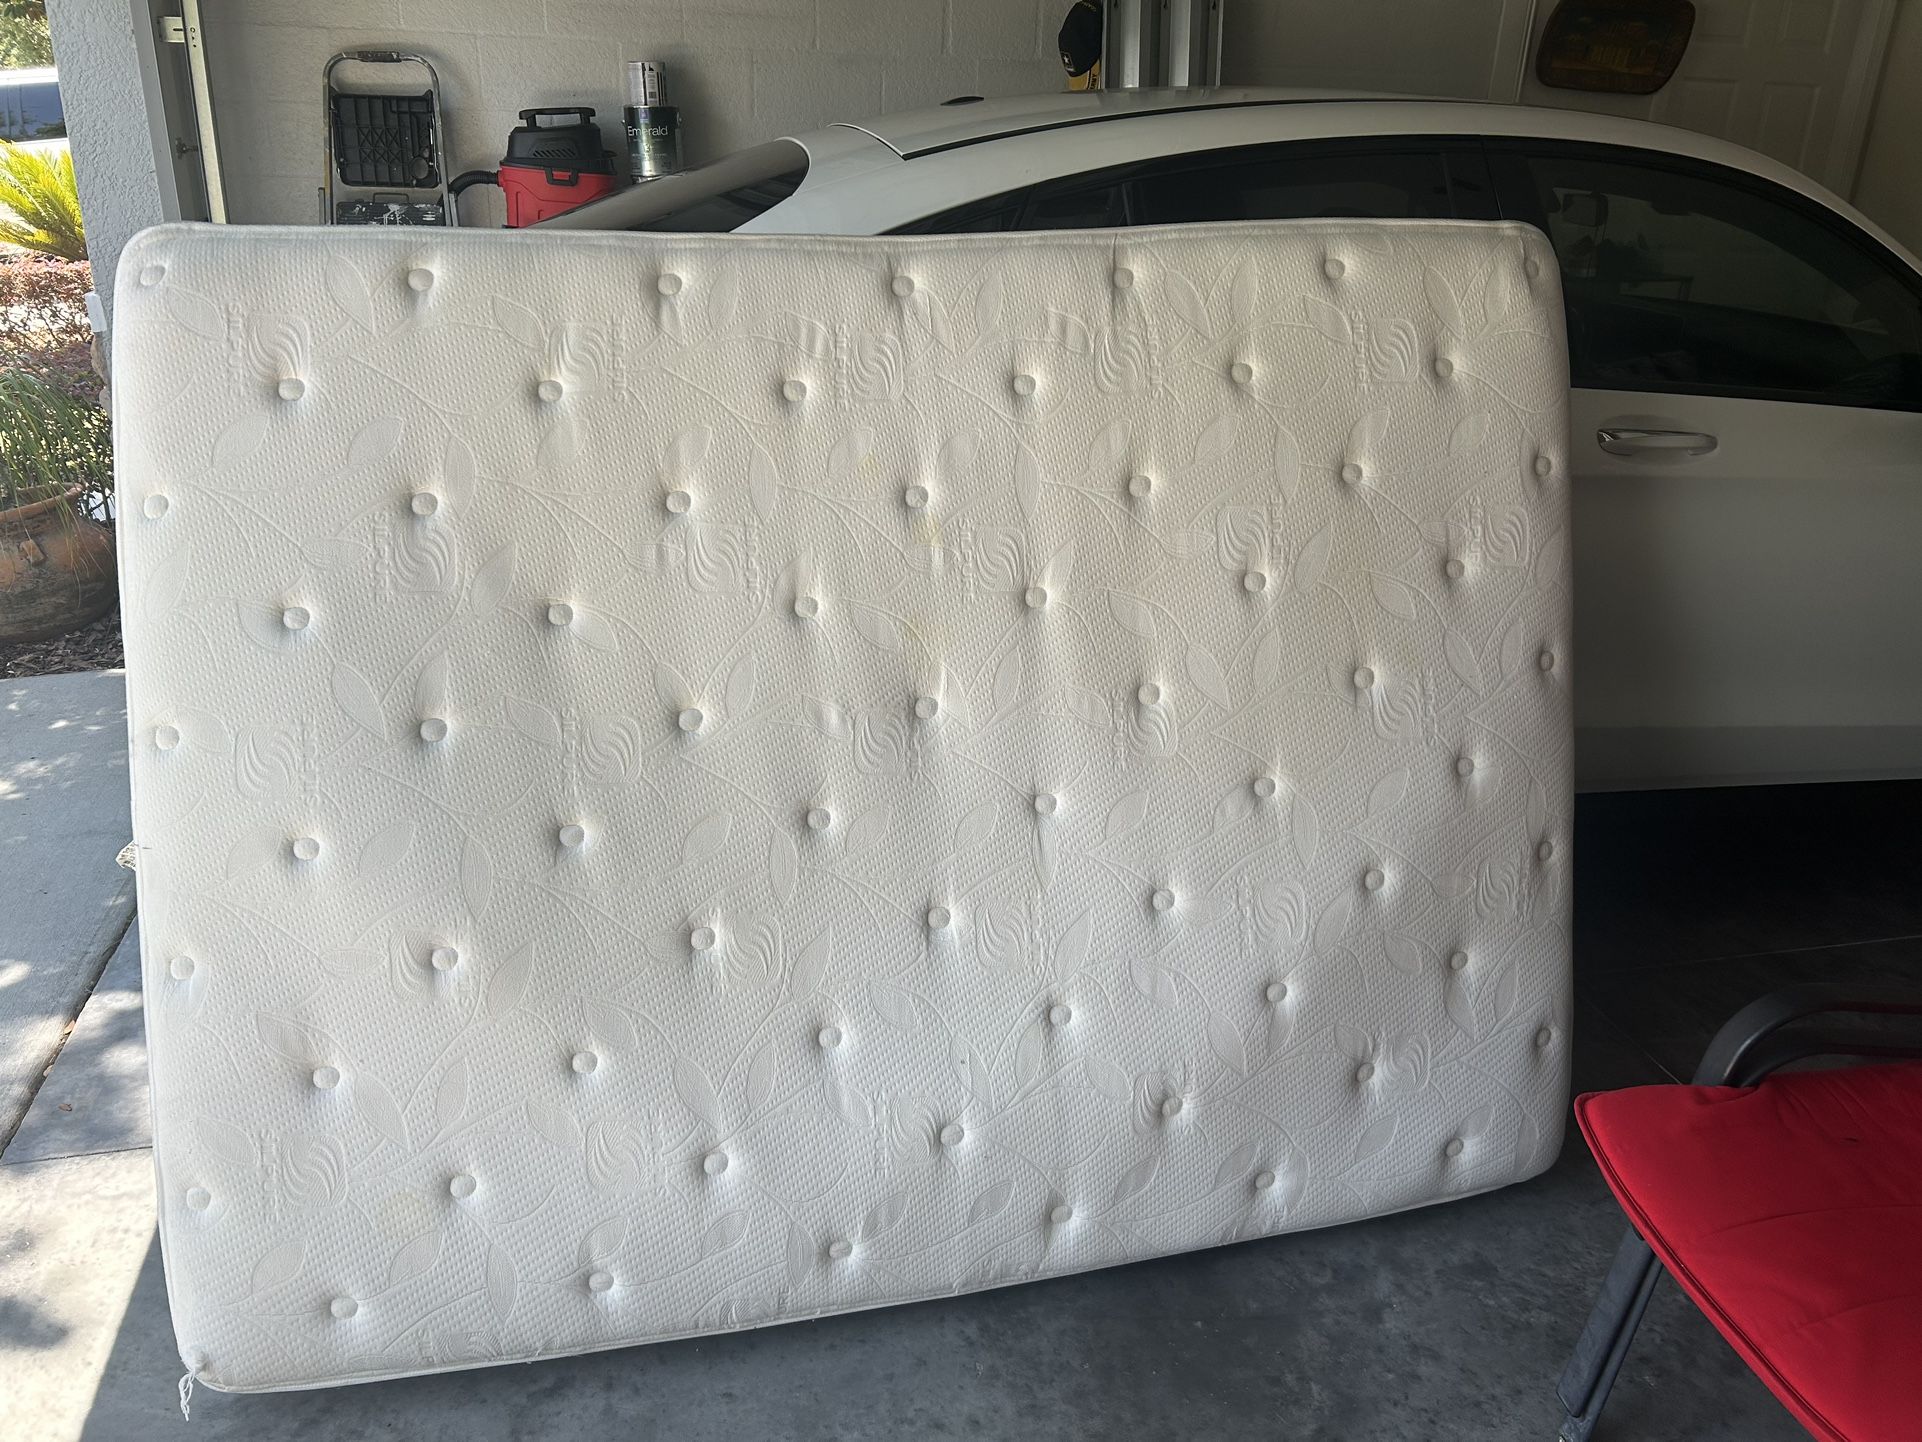 Queen Mattress and Box Springs